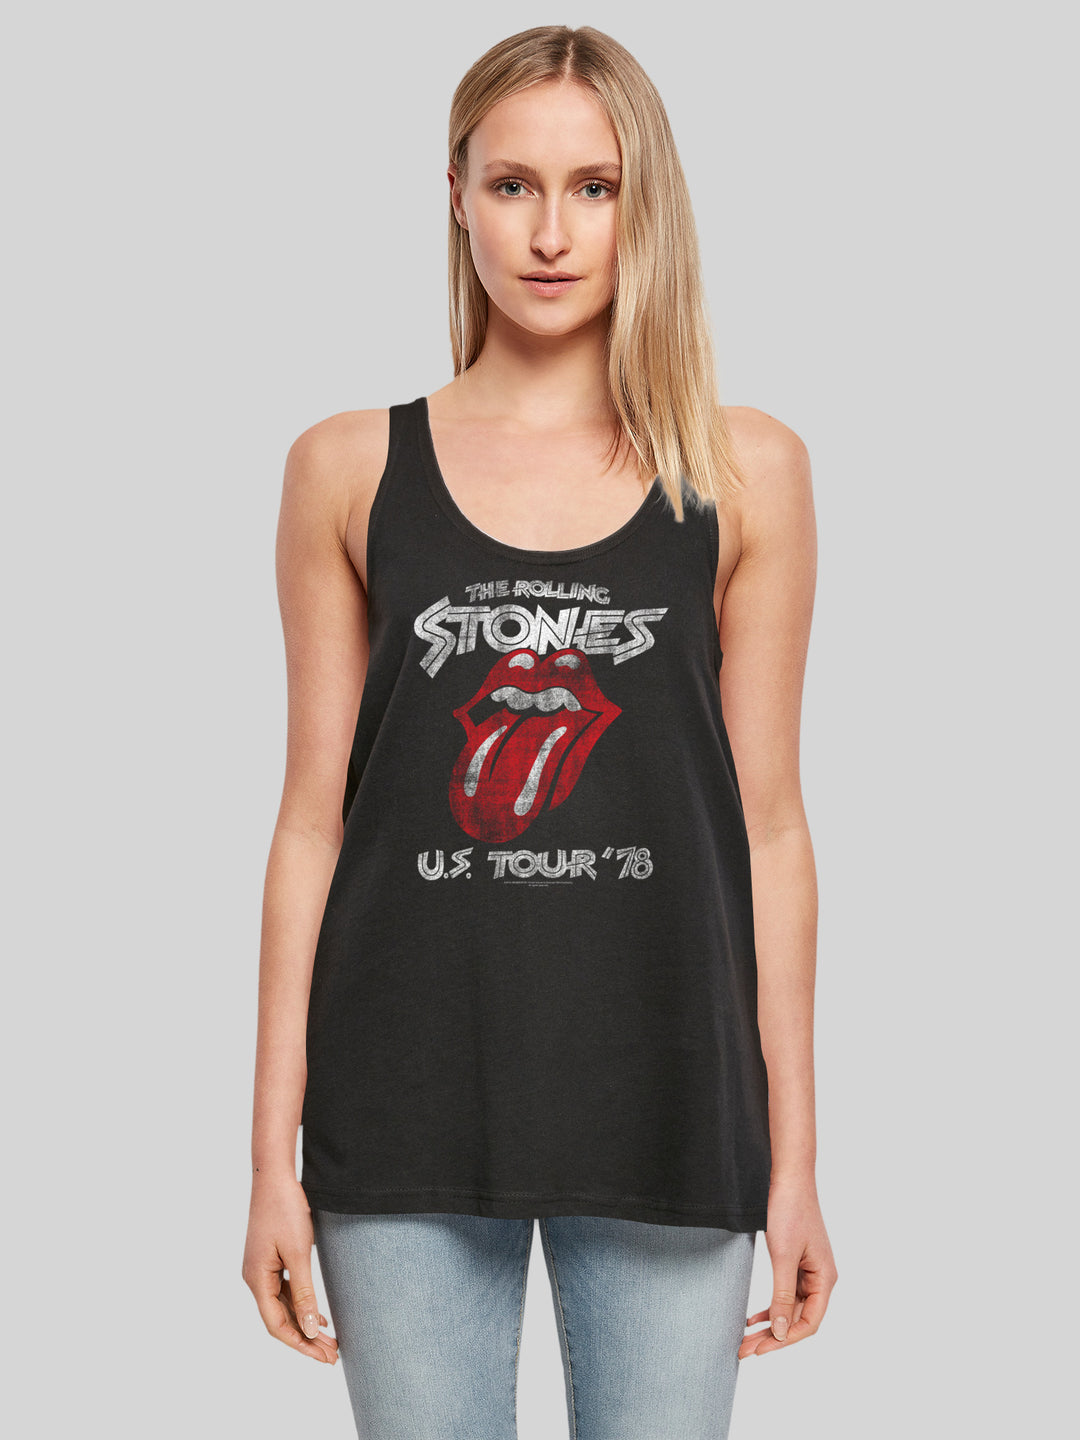 The Rolling Stones US Tour '78 and The Rolling Stones US Tour '78 Black with Ladies Tanktop